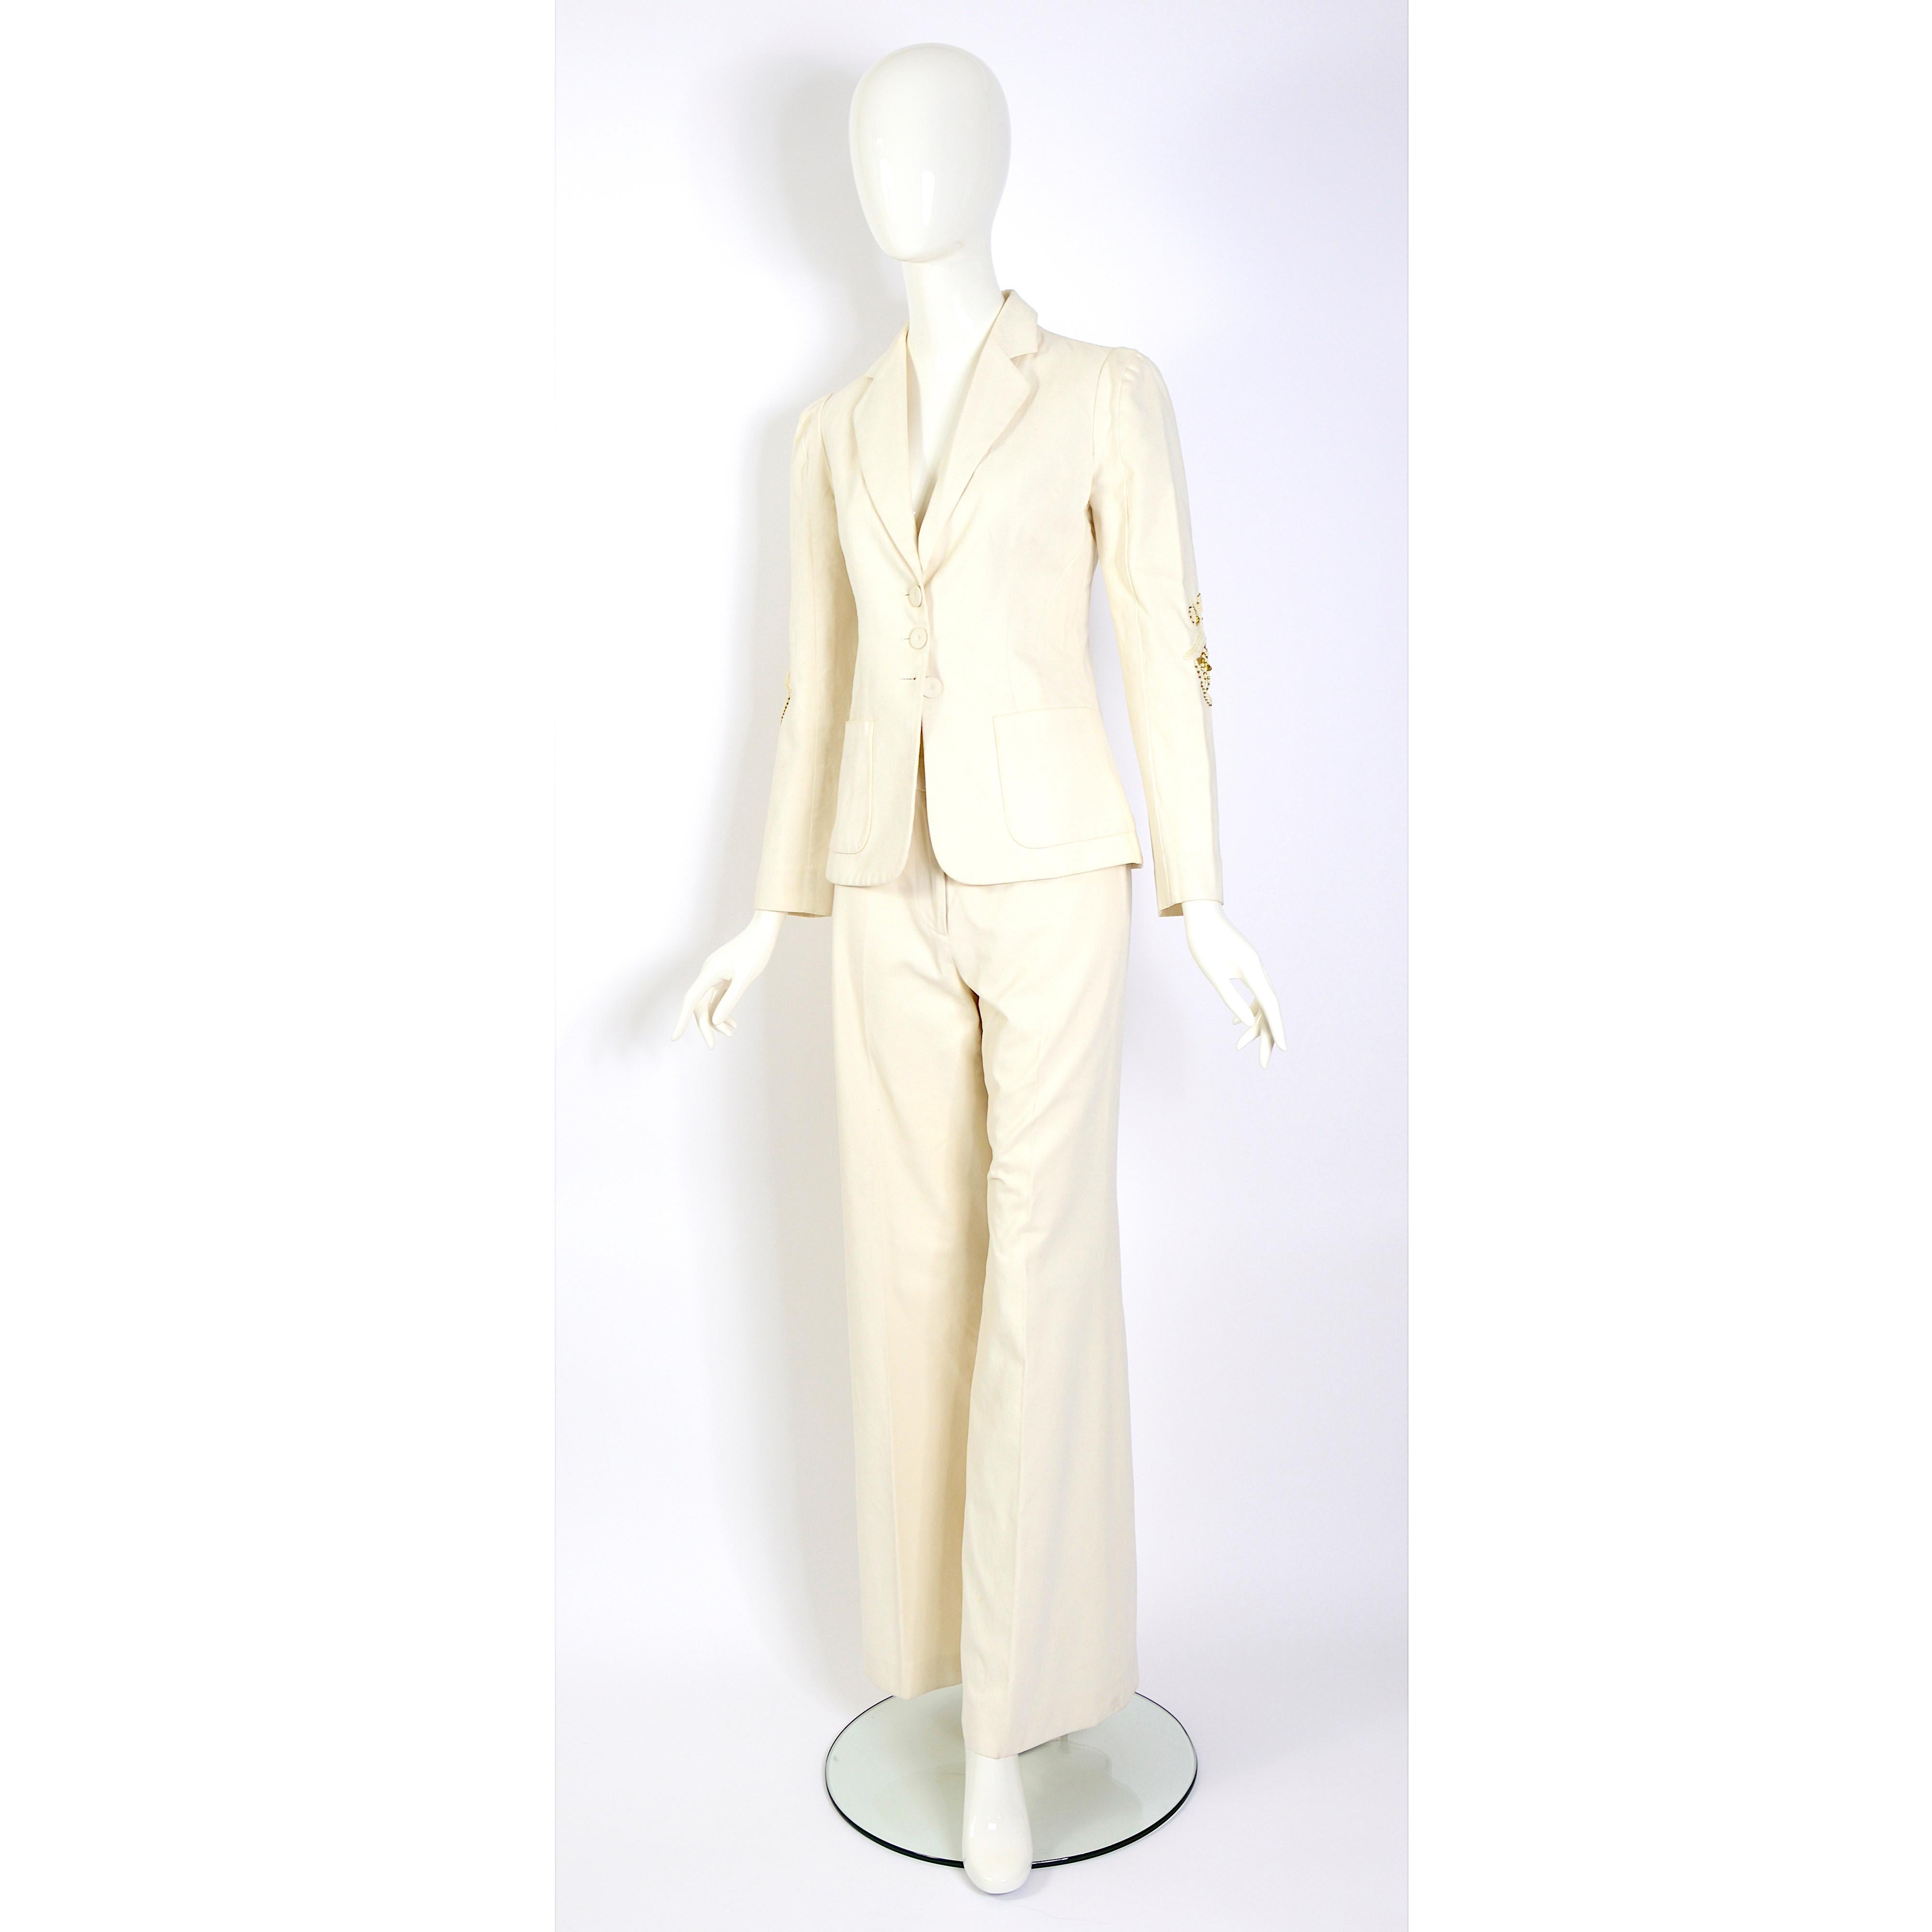 Women's Chloé by Phoebe Philo vintage S/S 2002 embellished back and sleeves cream suit For Sale